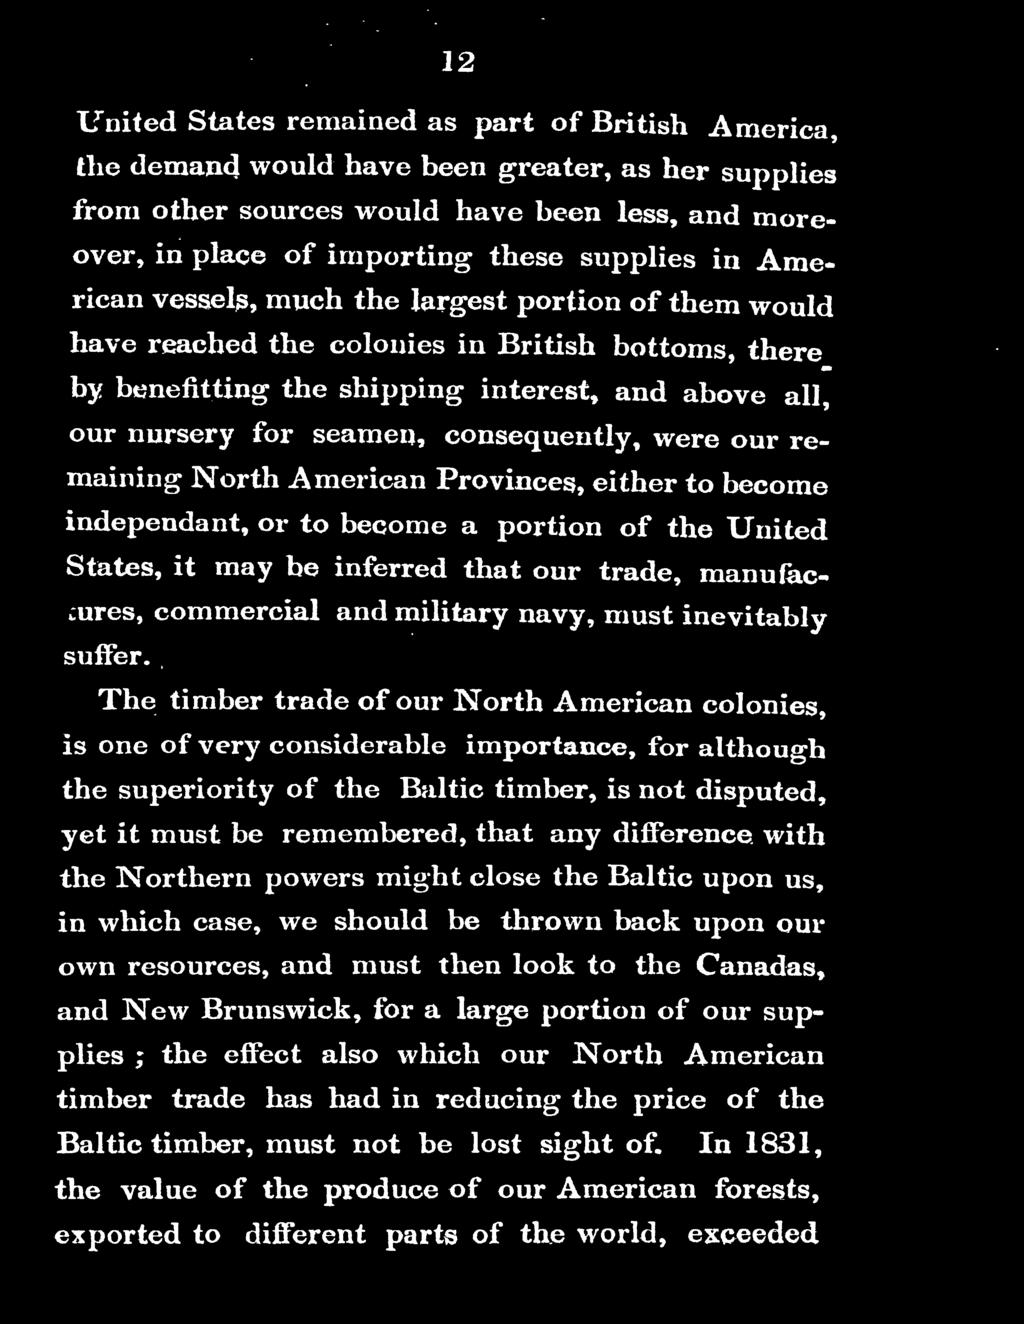 The timber trade of our North American colonies, is one of very considerable importance, for although the superiority of tl1e Baltic timber, is not disputed, yet it must be remembered, that any